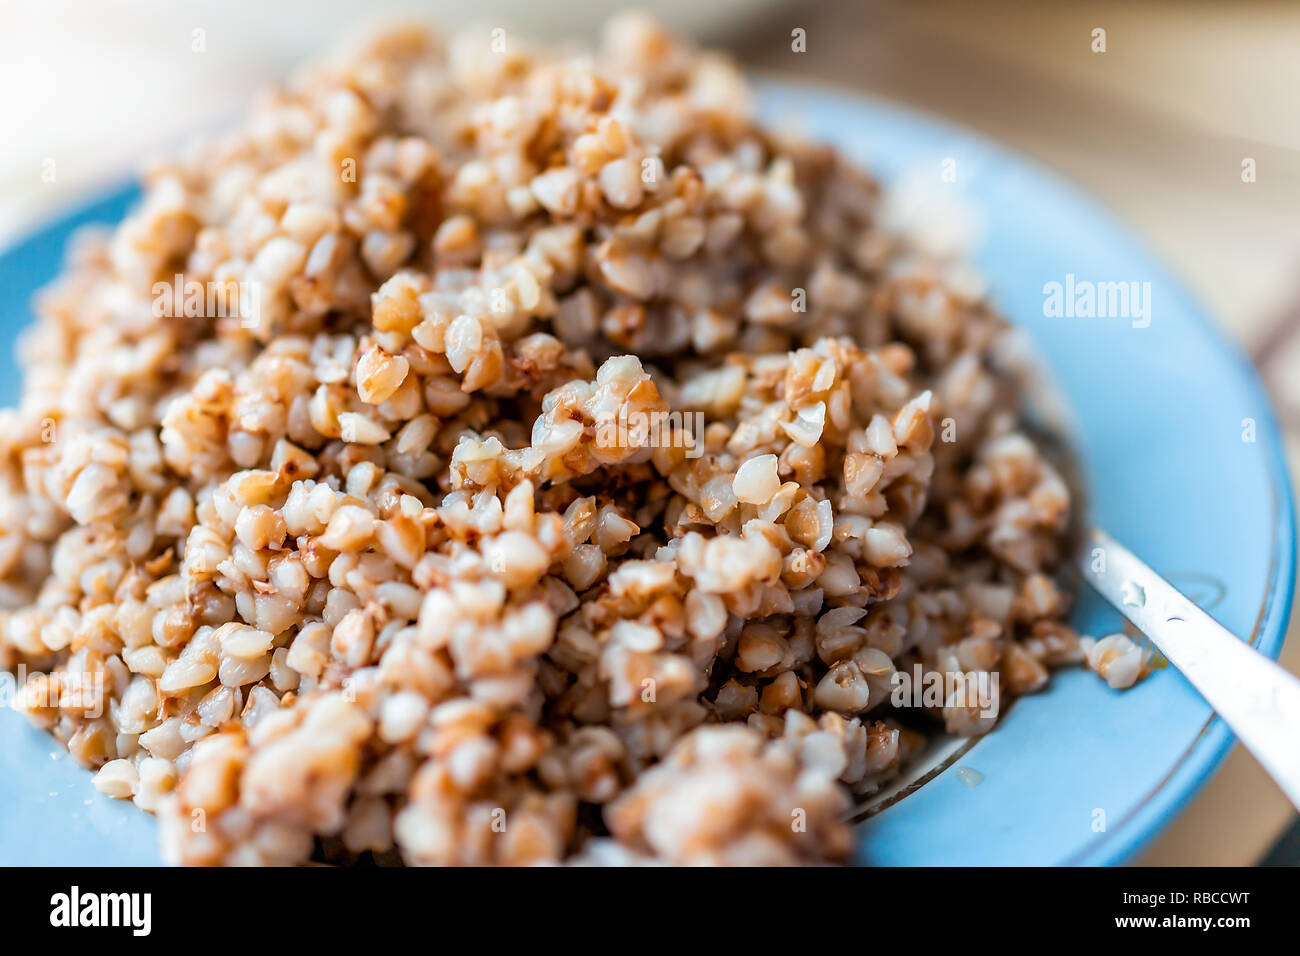 Macro closeup of boiled brown roasted traditional buckwheat grain breakfast Ukrainian or Russian food cooked plain in blue dish or plate on table Stock Photo